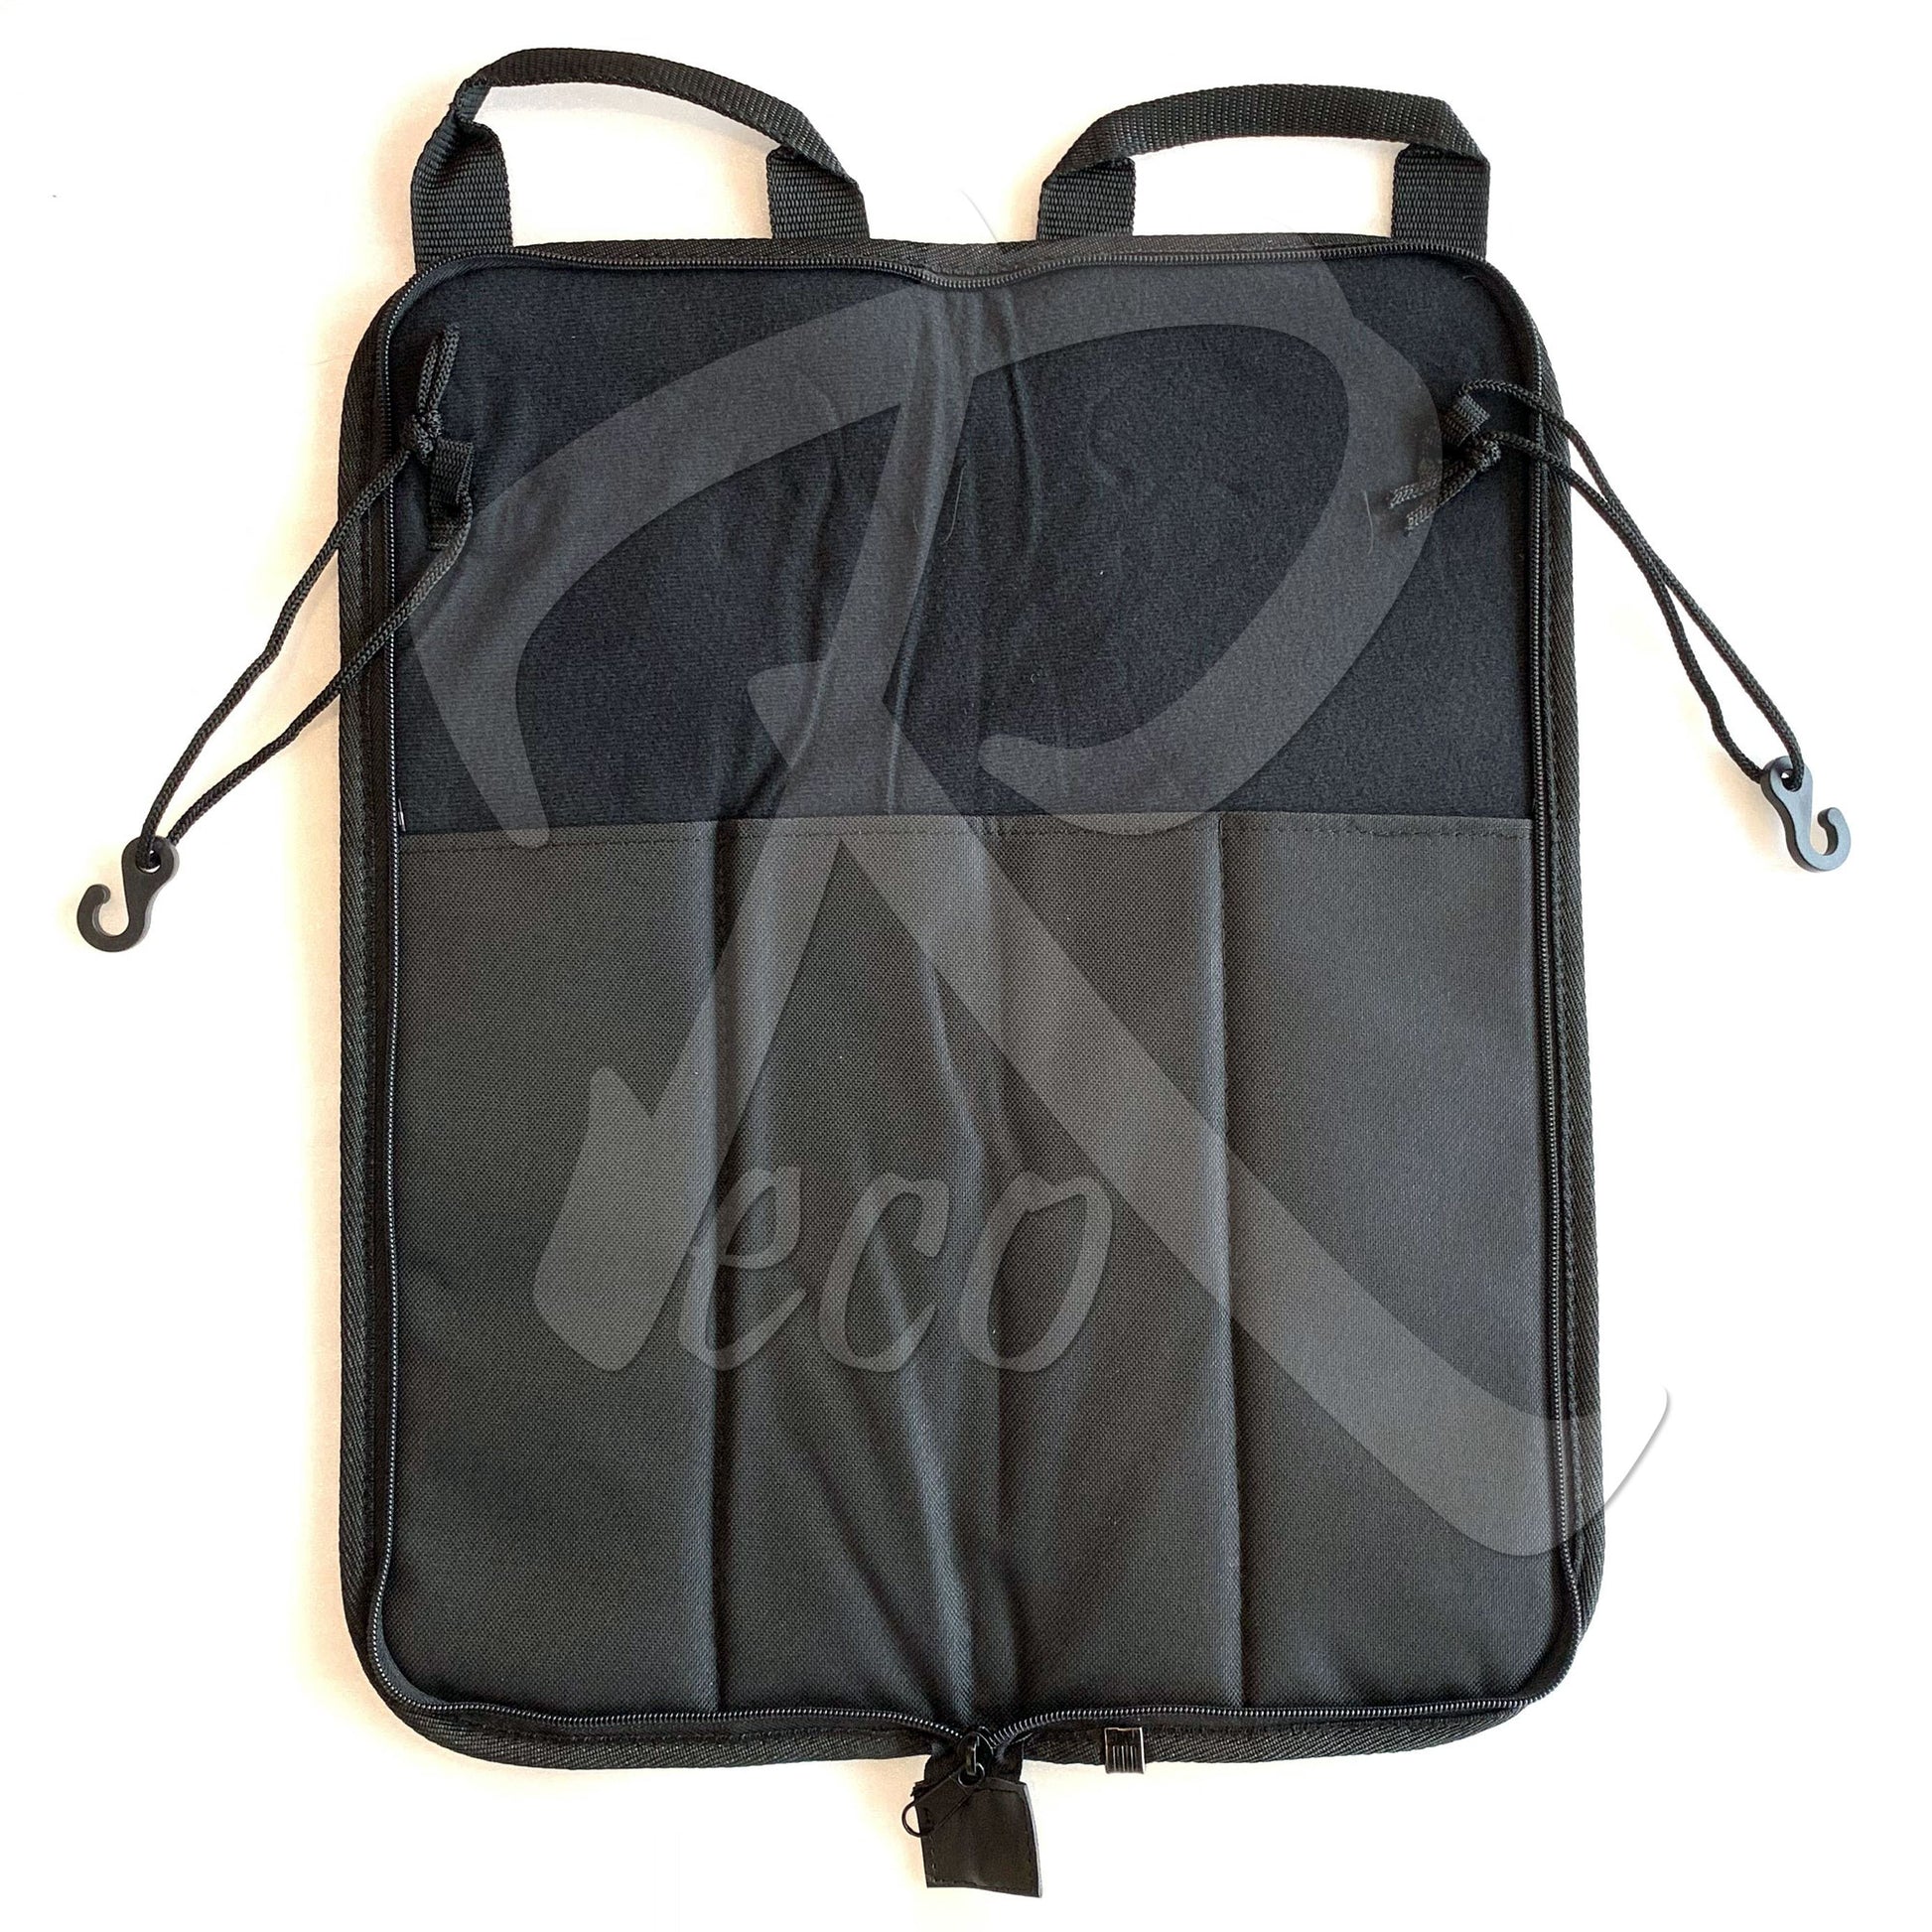 Attitude DrumStick Bag Case with Carrying Strap | Reco Music Malaysia